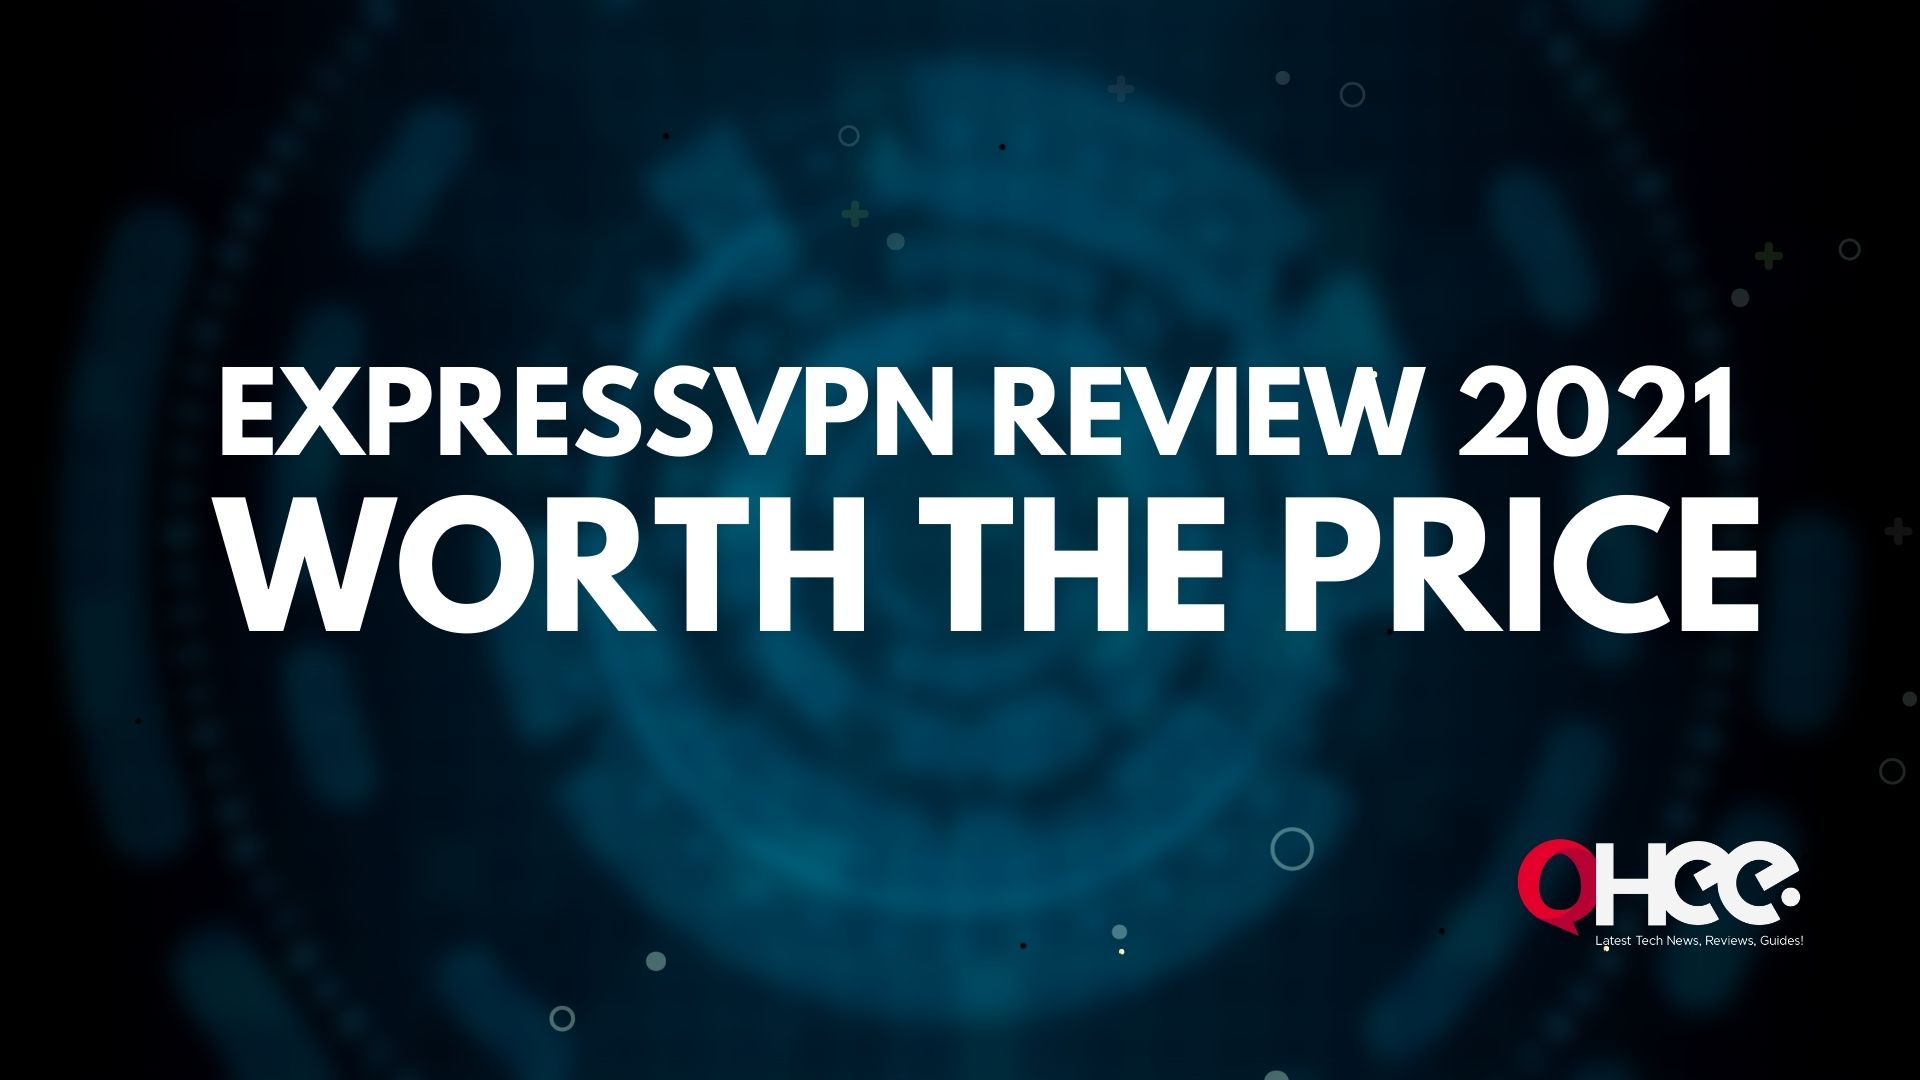 ExpressVPN Review 2022: Safe, But is It Worth The Price?